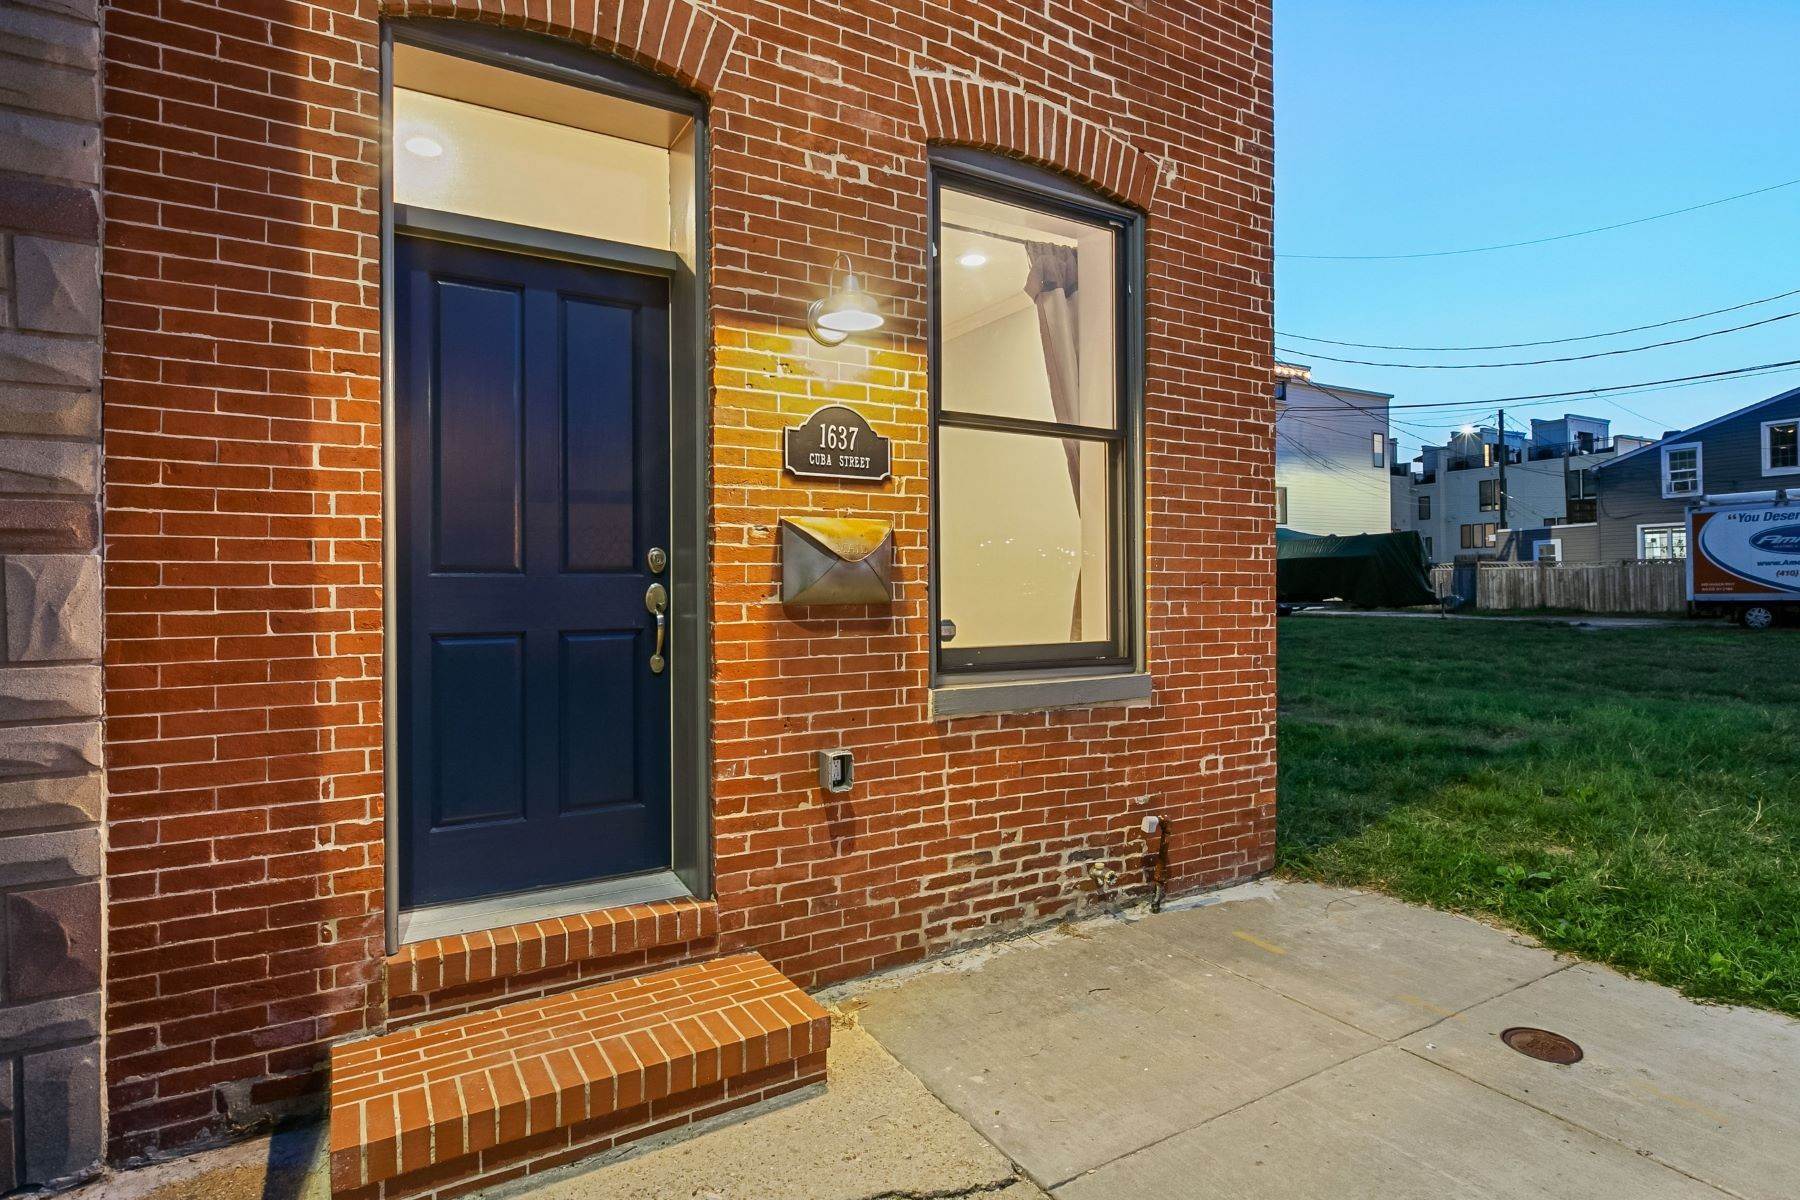 7. Townhouse at Locust Point Townhome 1637 Cuba Street Baltimore, Maryland 21230 United States